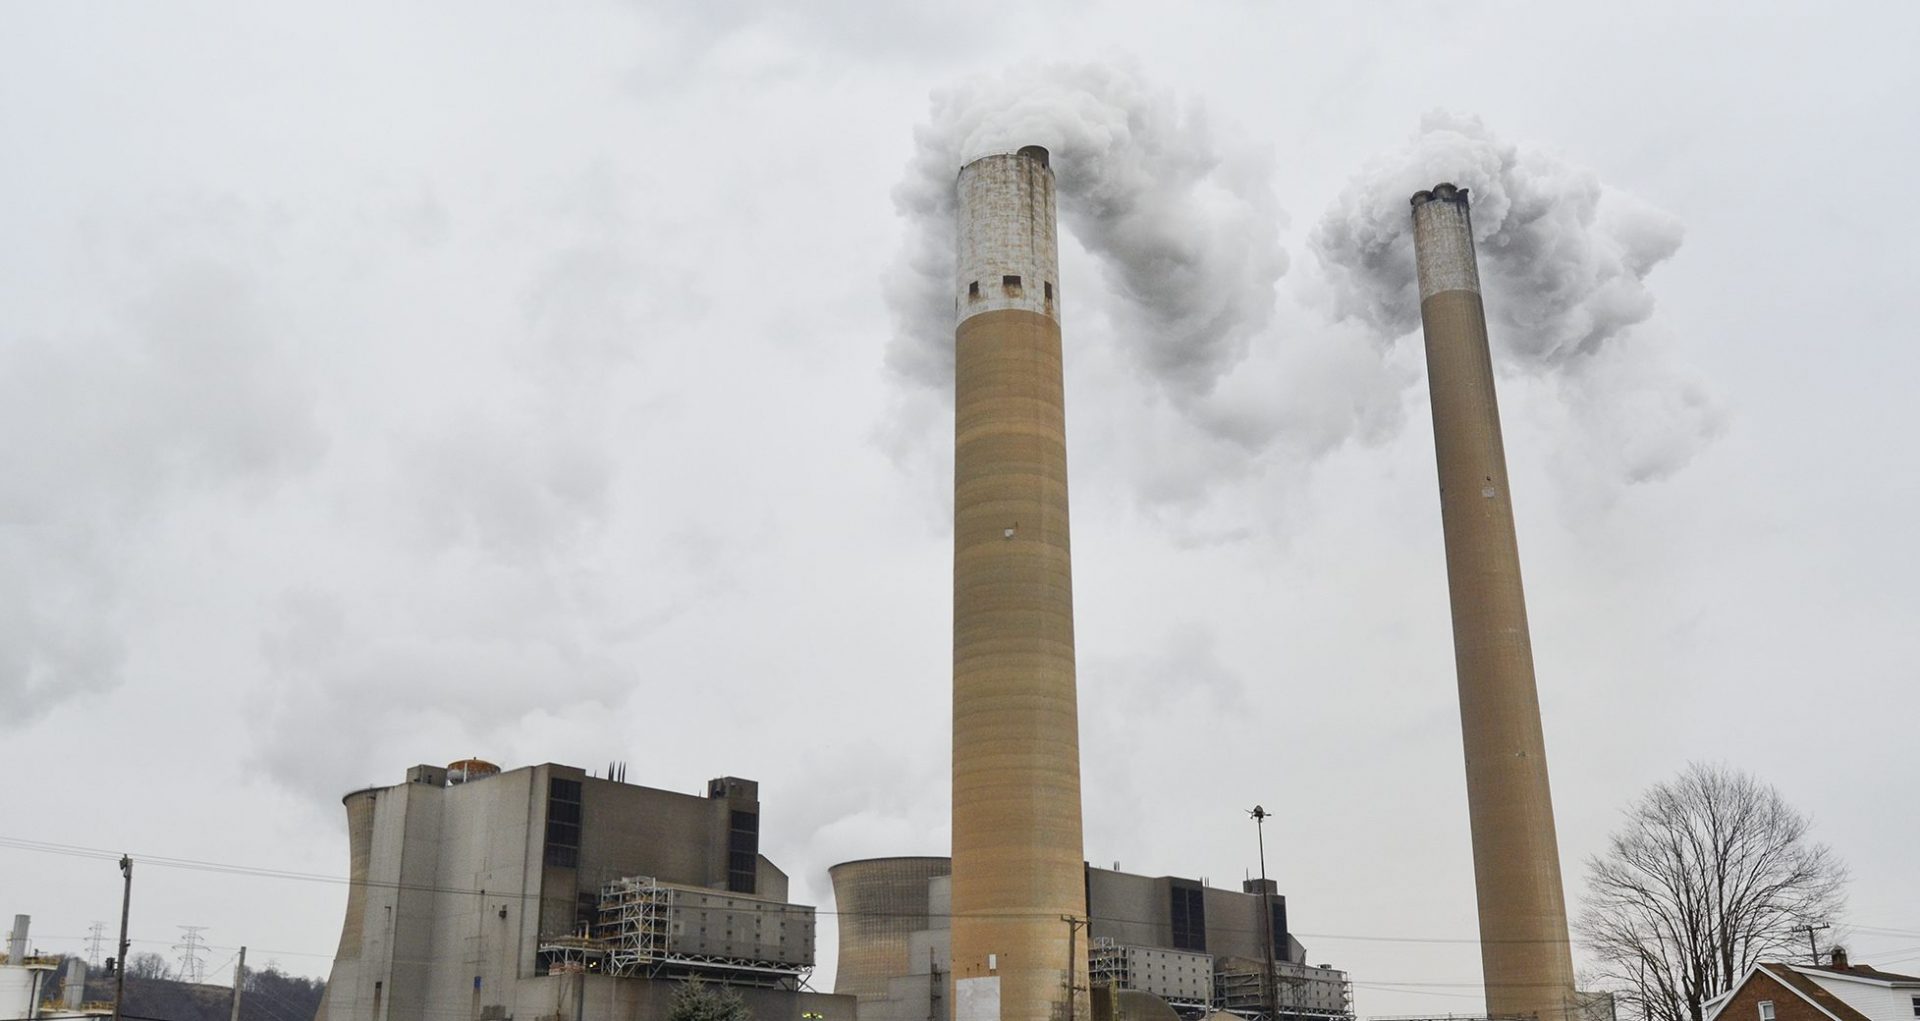 The Bruce Mansfield Power Plant burns coal to generate electricity in Beaver County.